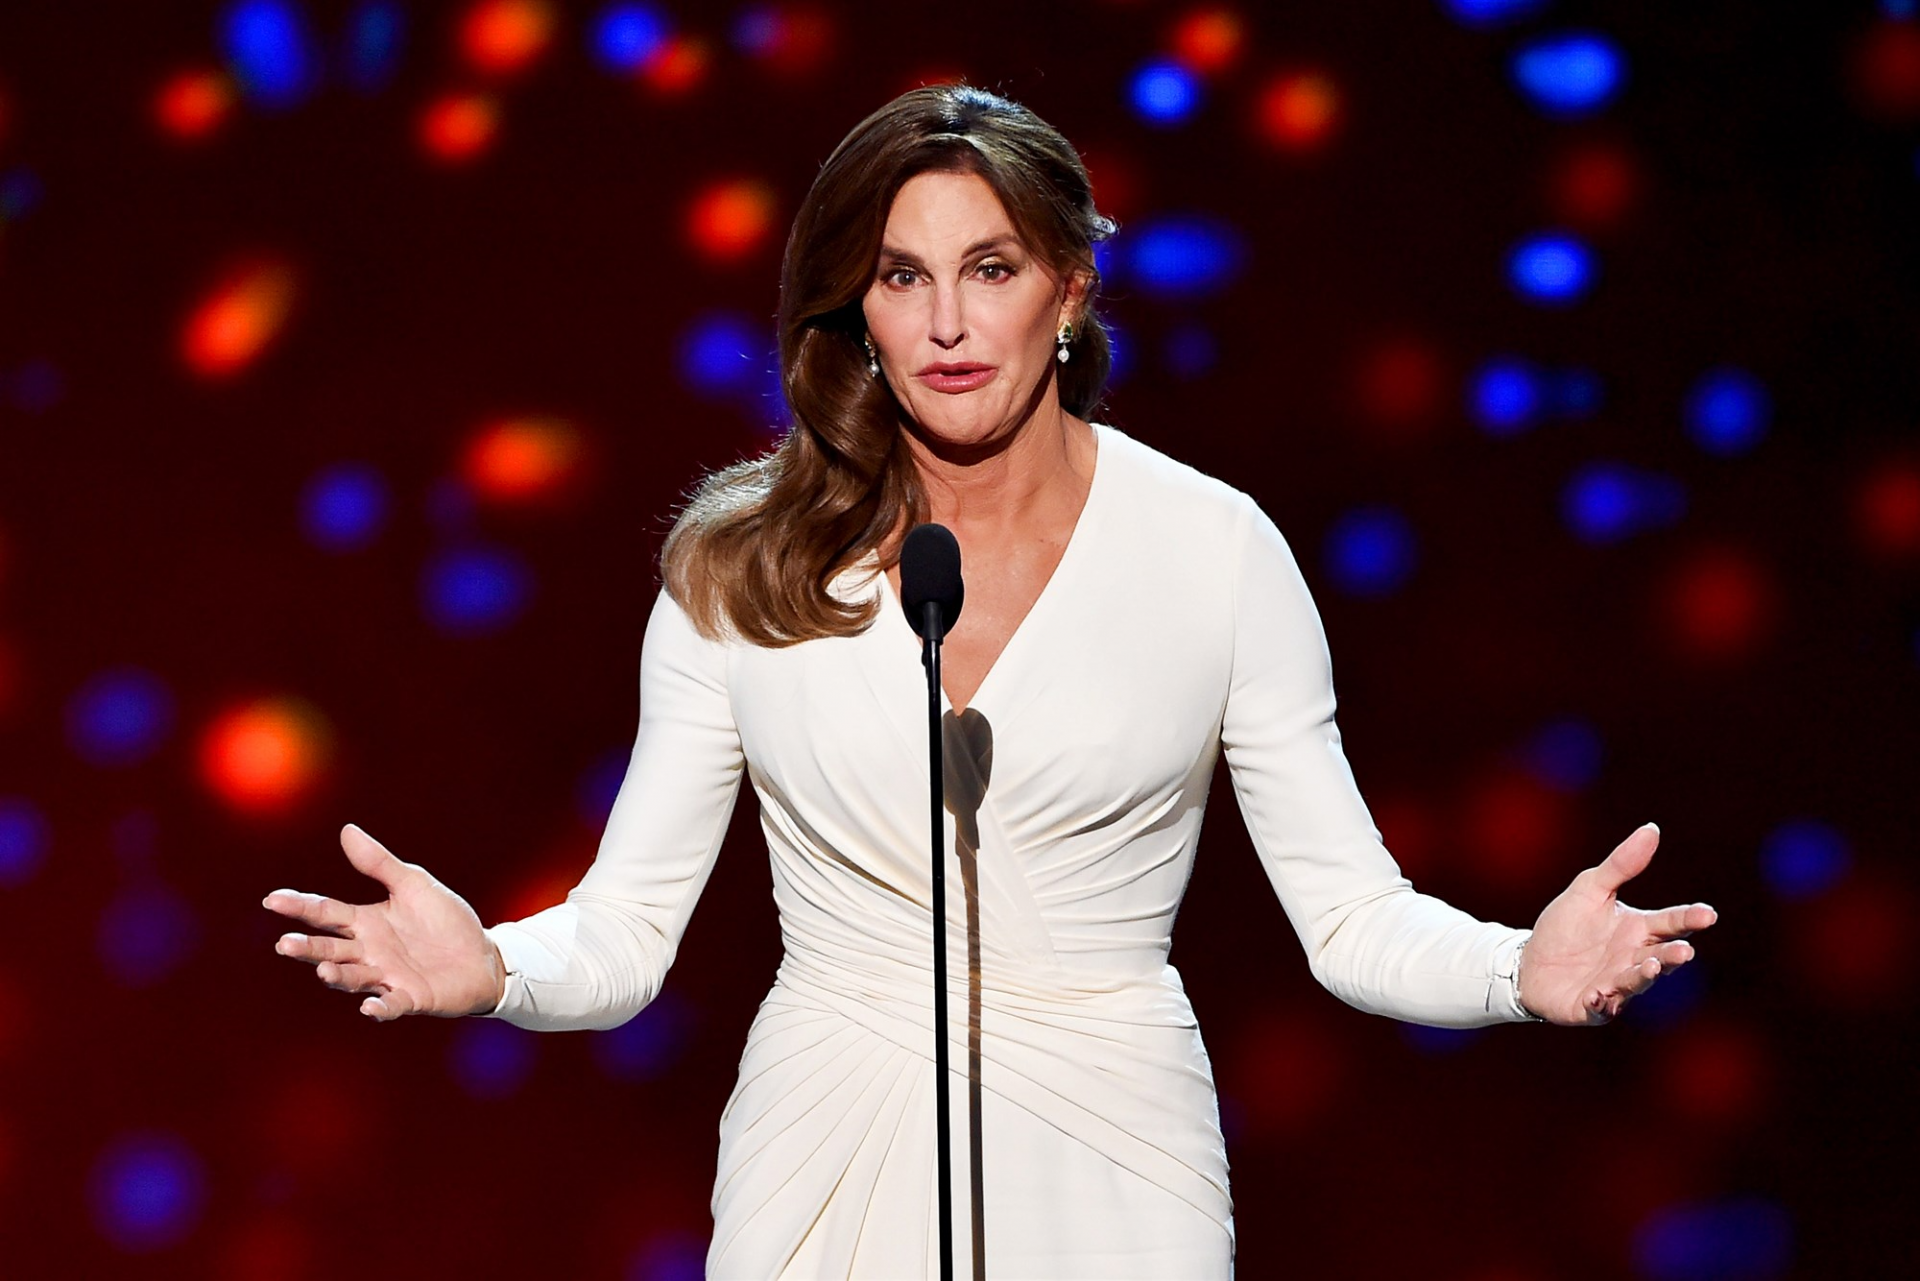 Caitlyn Jenner accepts the Arthur Ashe Courage Award onstage during The 2015 ESPYS at the Microsoft Theater on July 15, in Los Angeles.Kevin Winter / Getty Images file